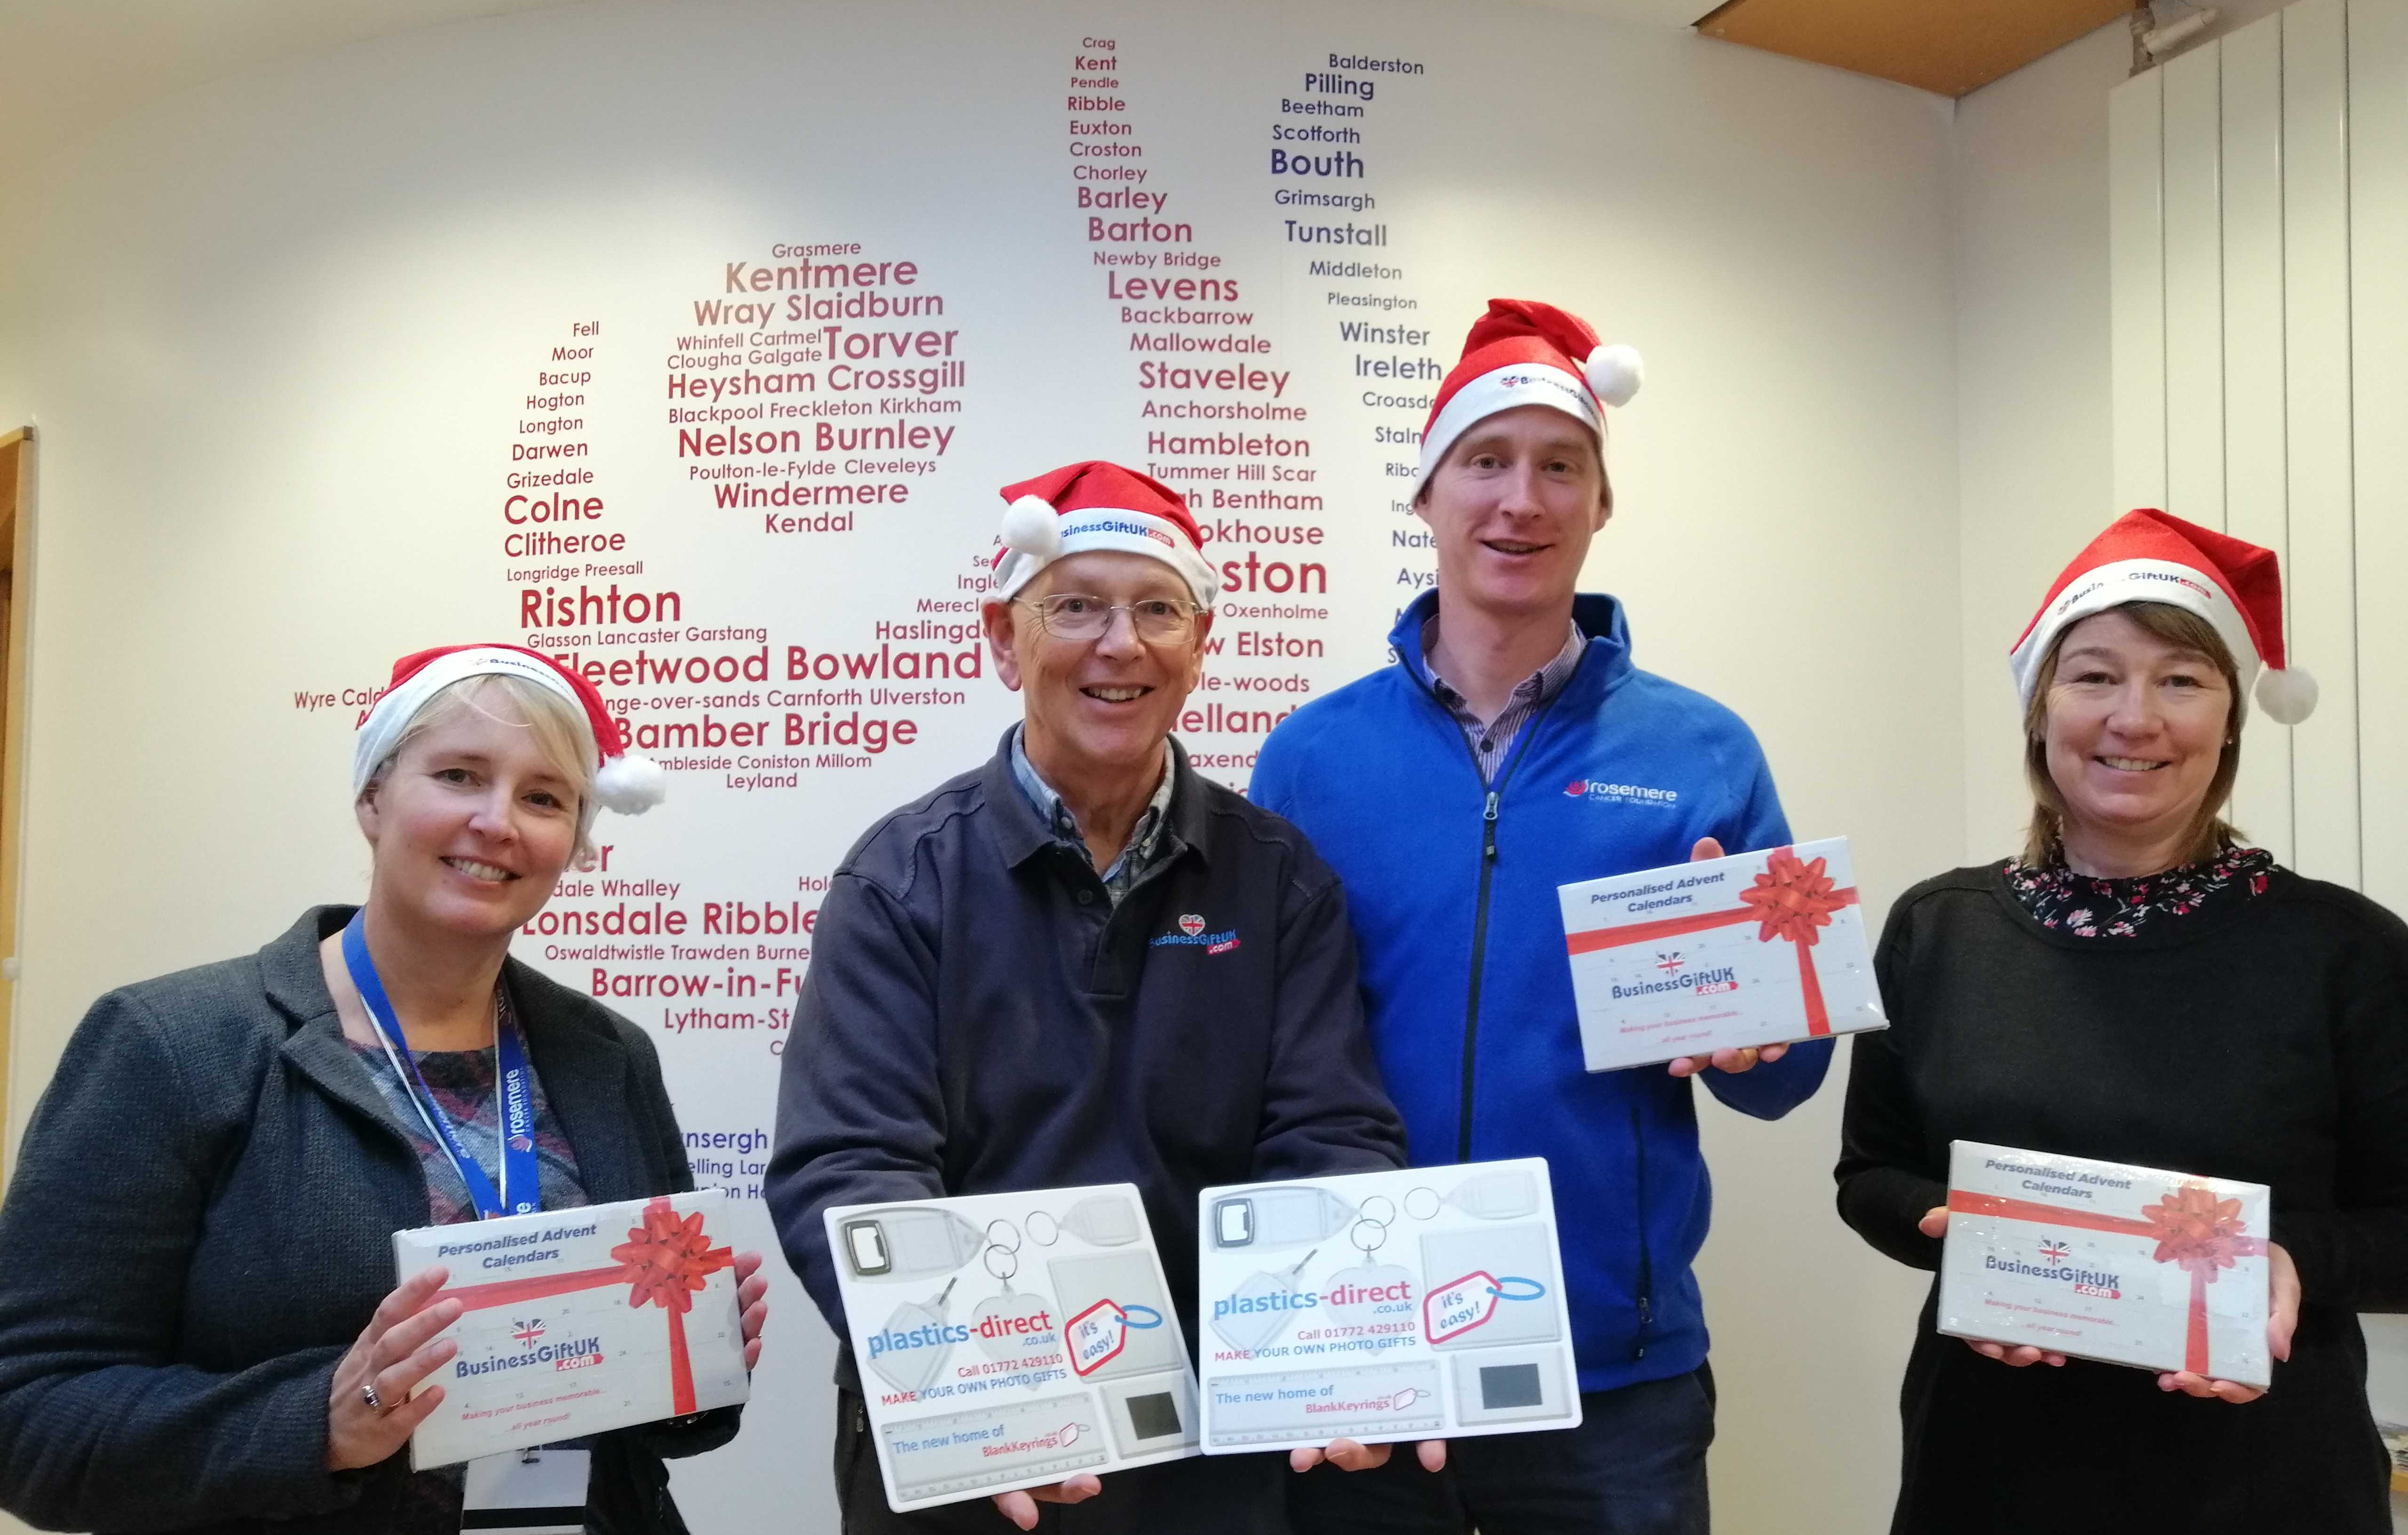 Our Charity Christmas Challenge in Aid of Rosemere  BusinessGiftUK.com